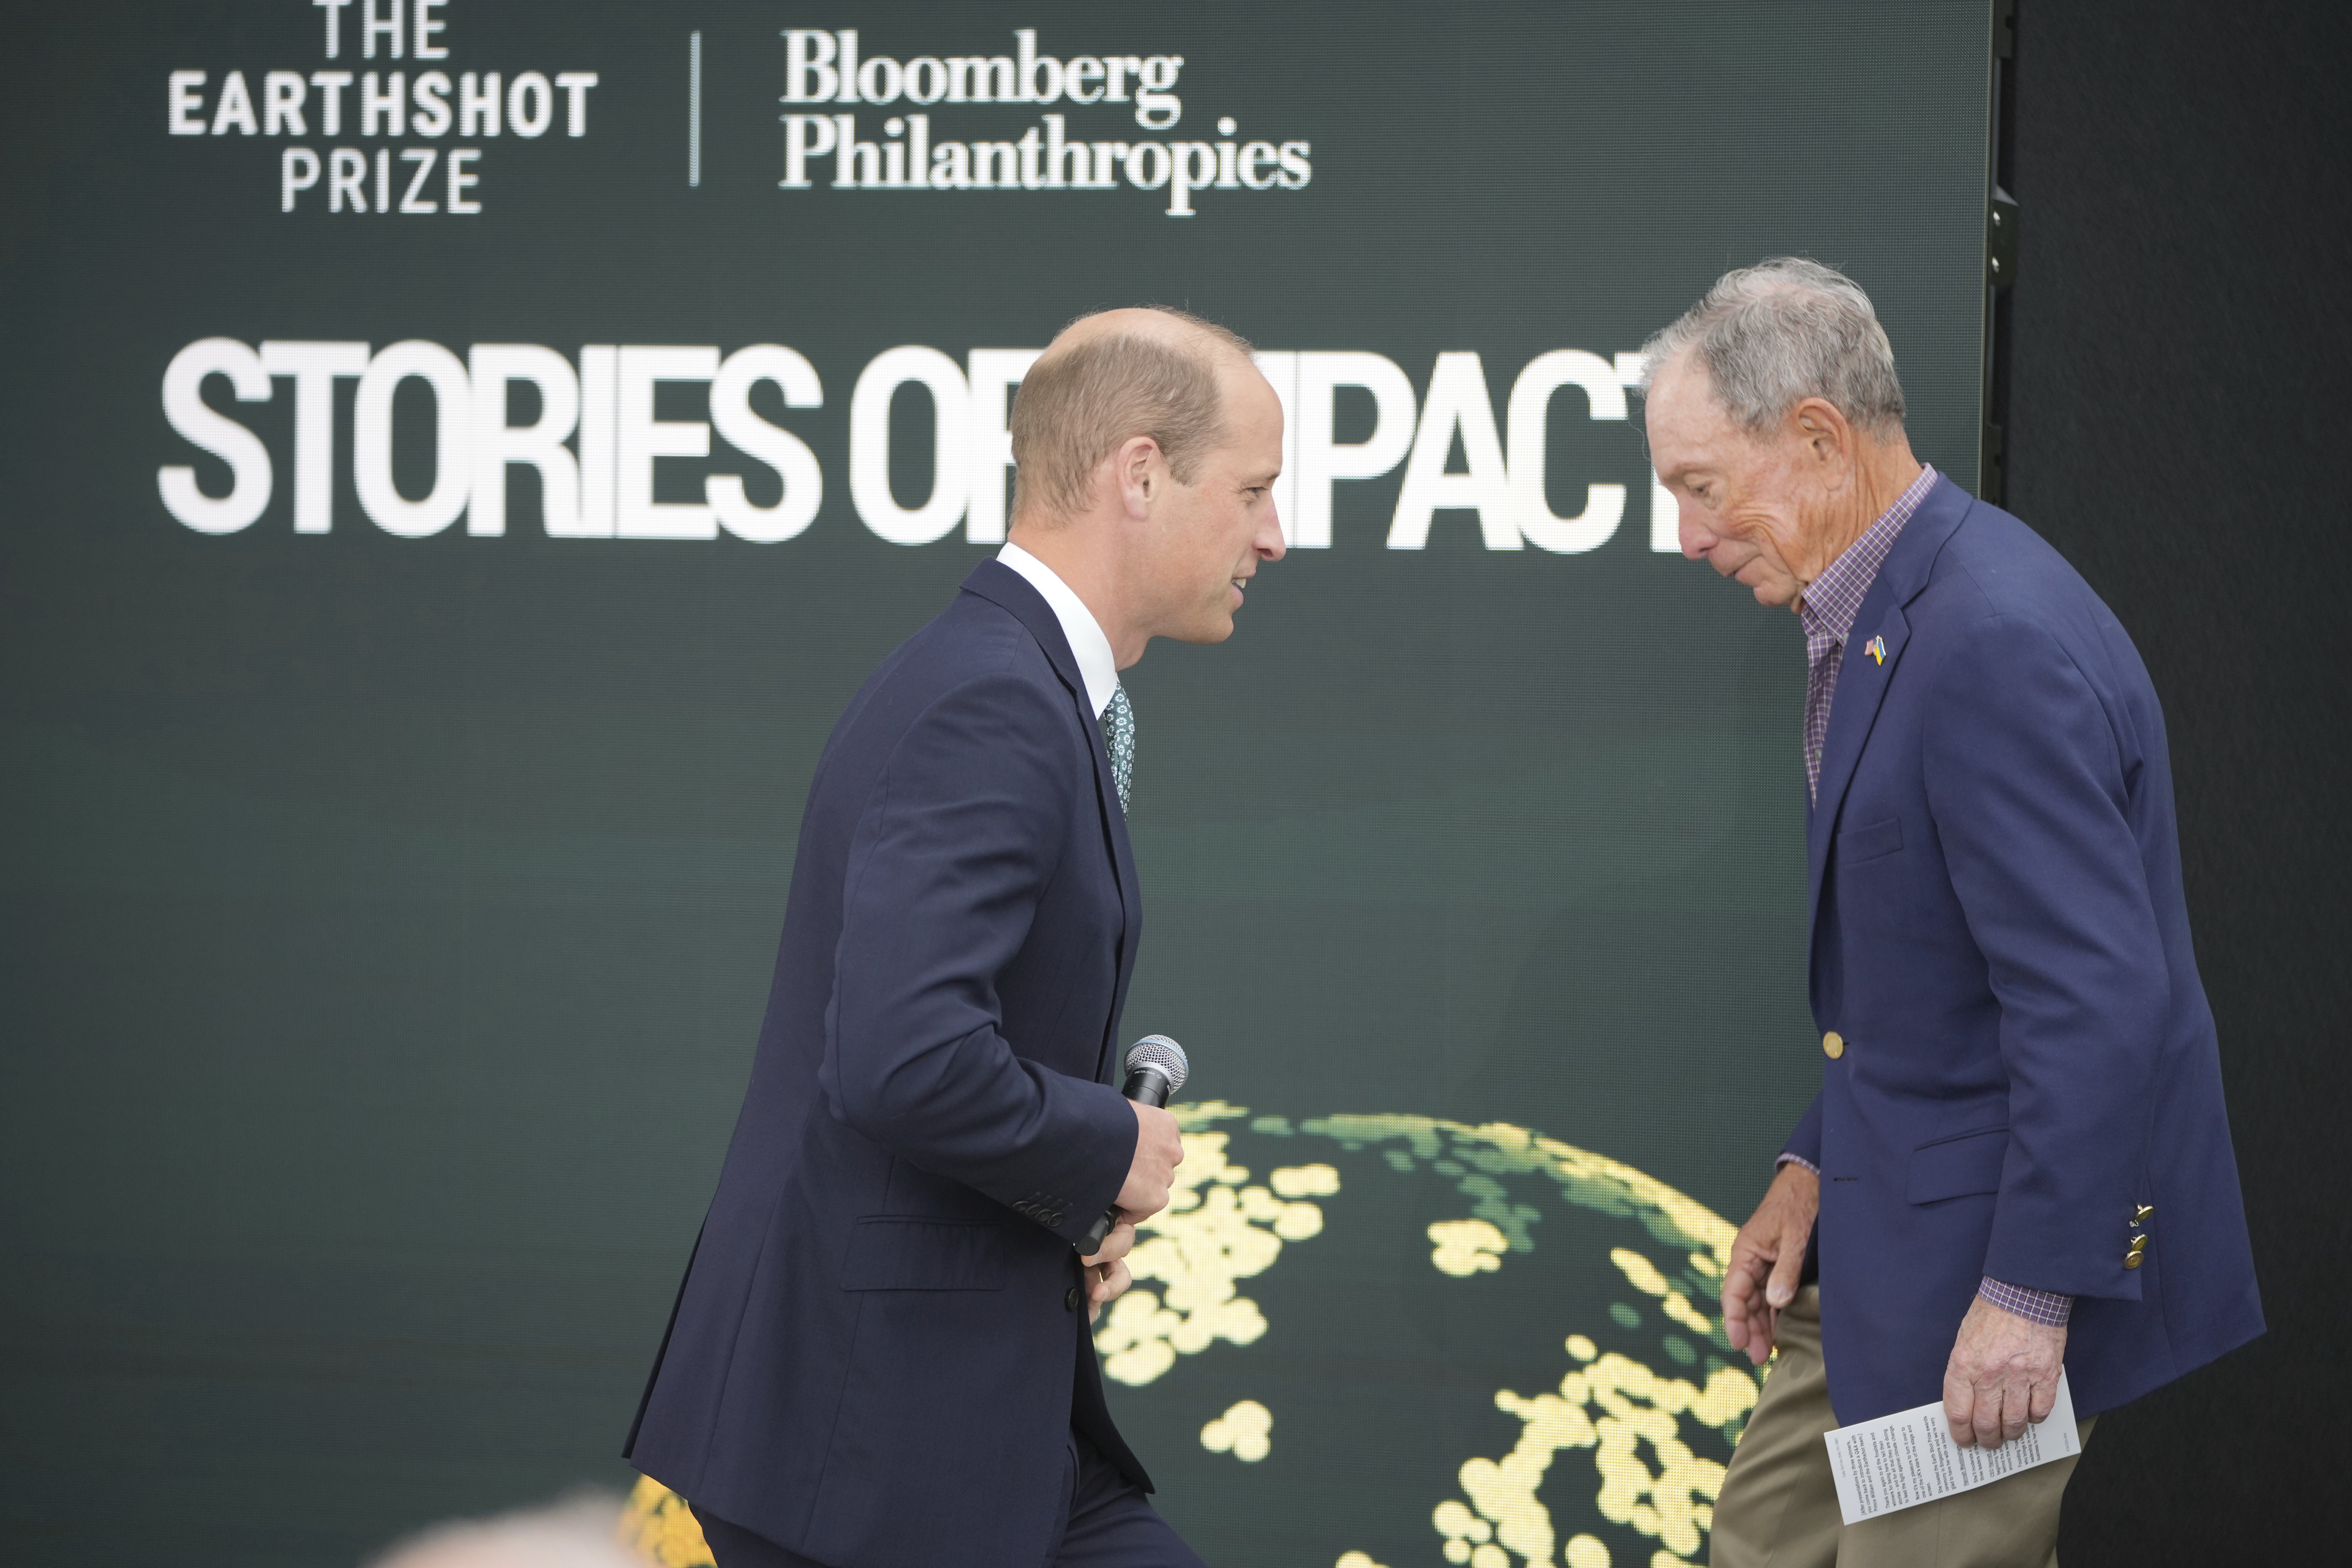 The Prince of Wales was introduced by billionaire Michael Bloomberg, whose charity, Bloomberg Philanthropies, is a founding partner of the Earthshot Prize (Kin Cheung/PA)